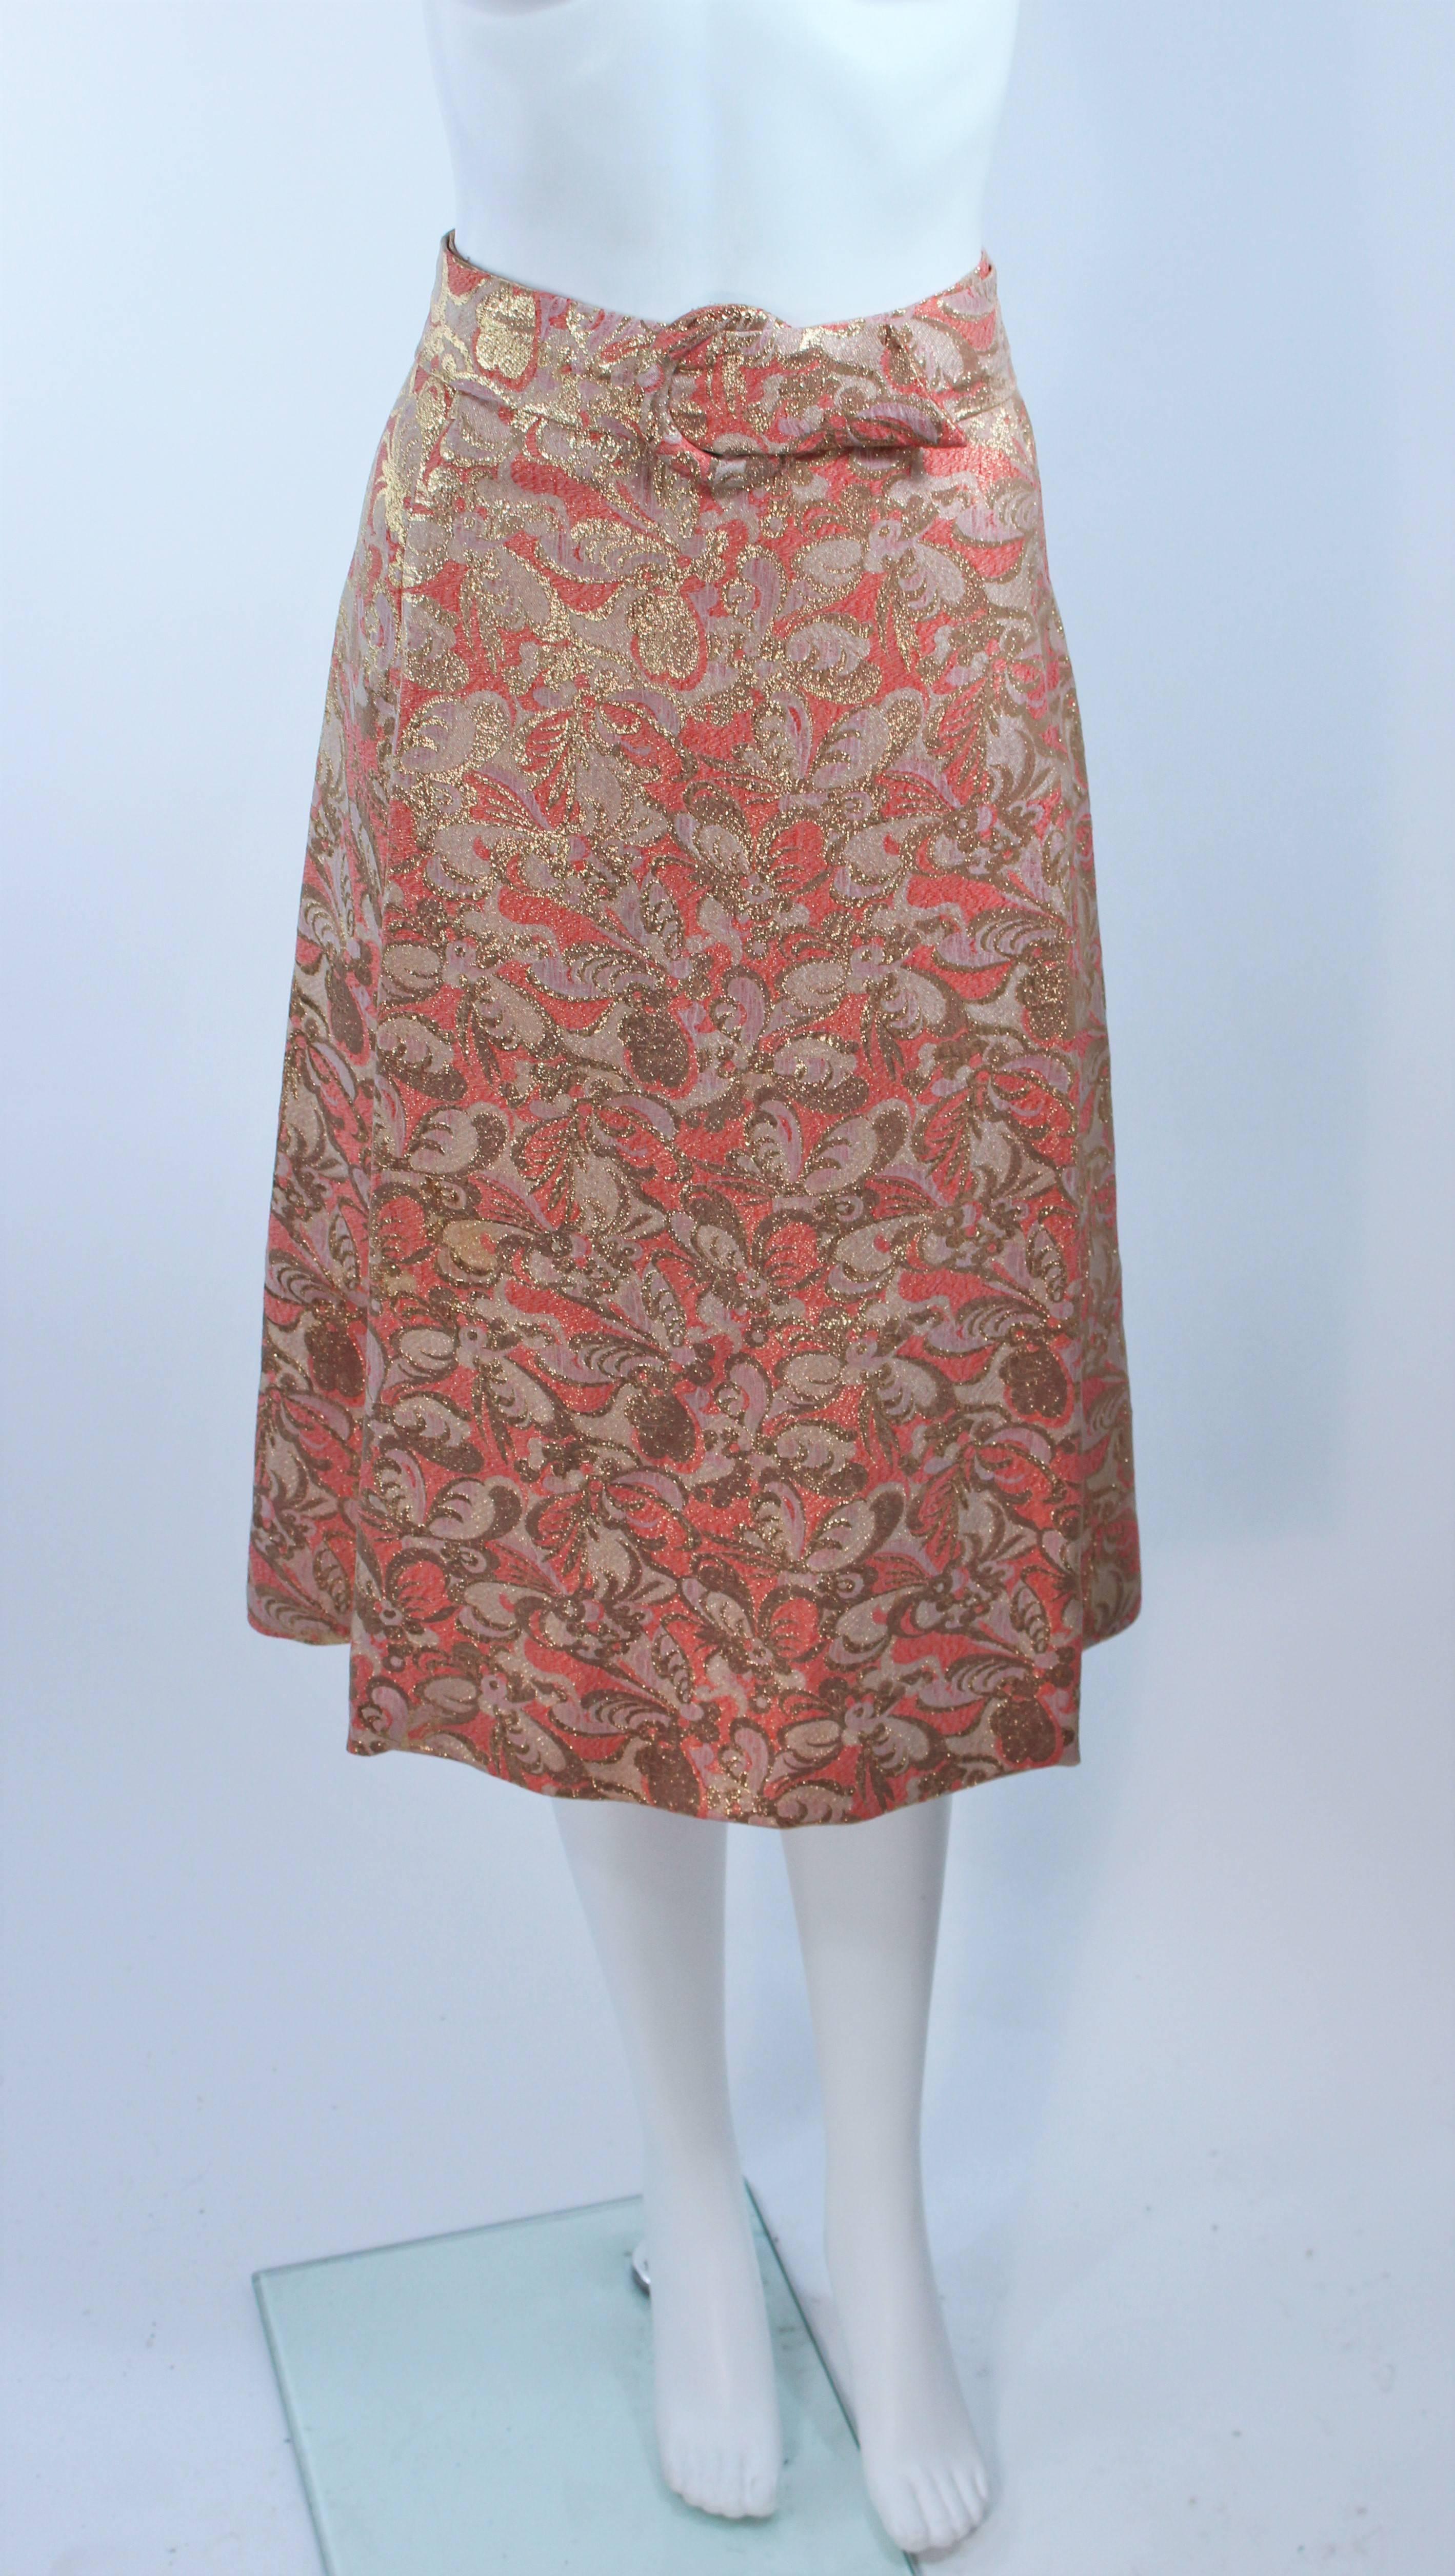 Jimi Fox Peach & Gold Brocade Skirt Suit with Rhinestone Buttons Size 6 For Sale 3